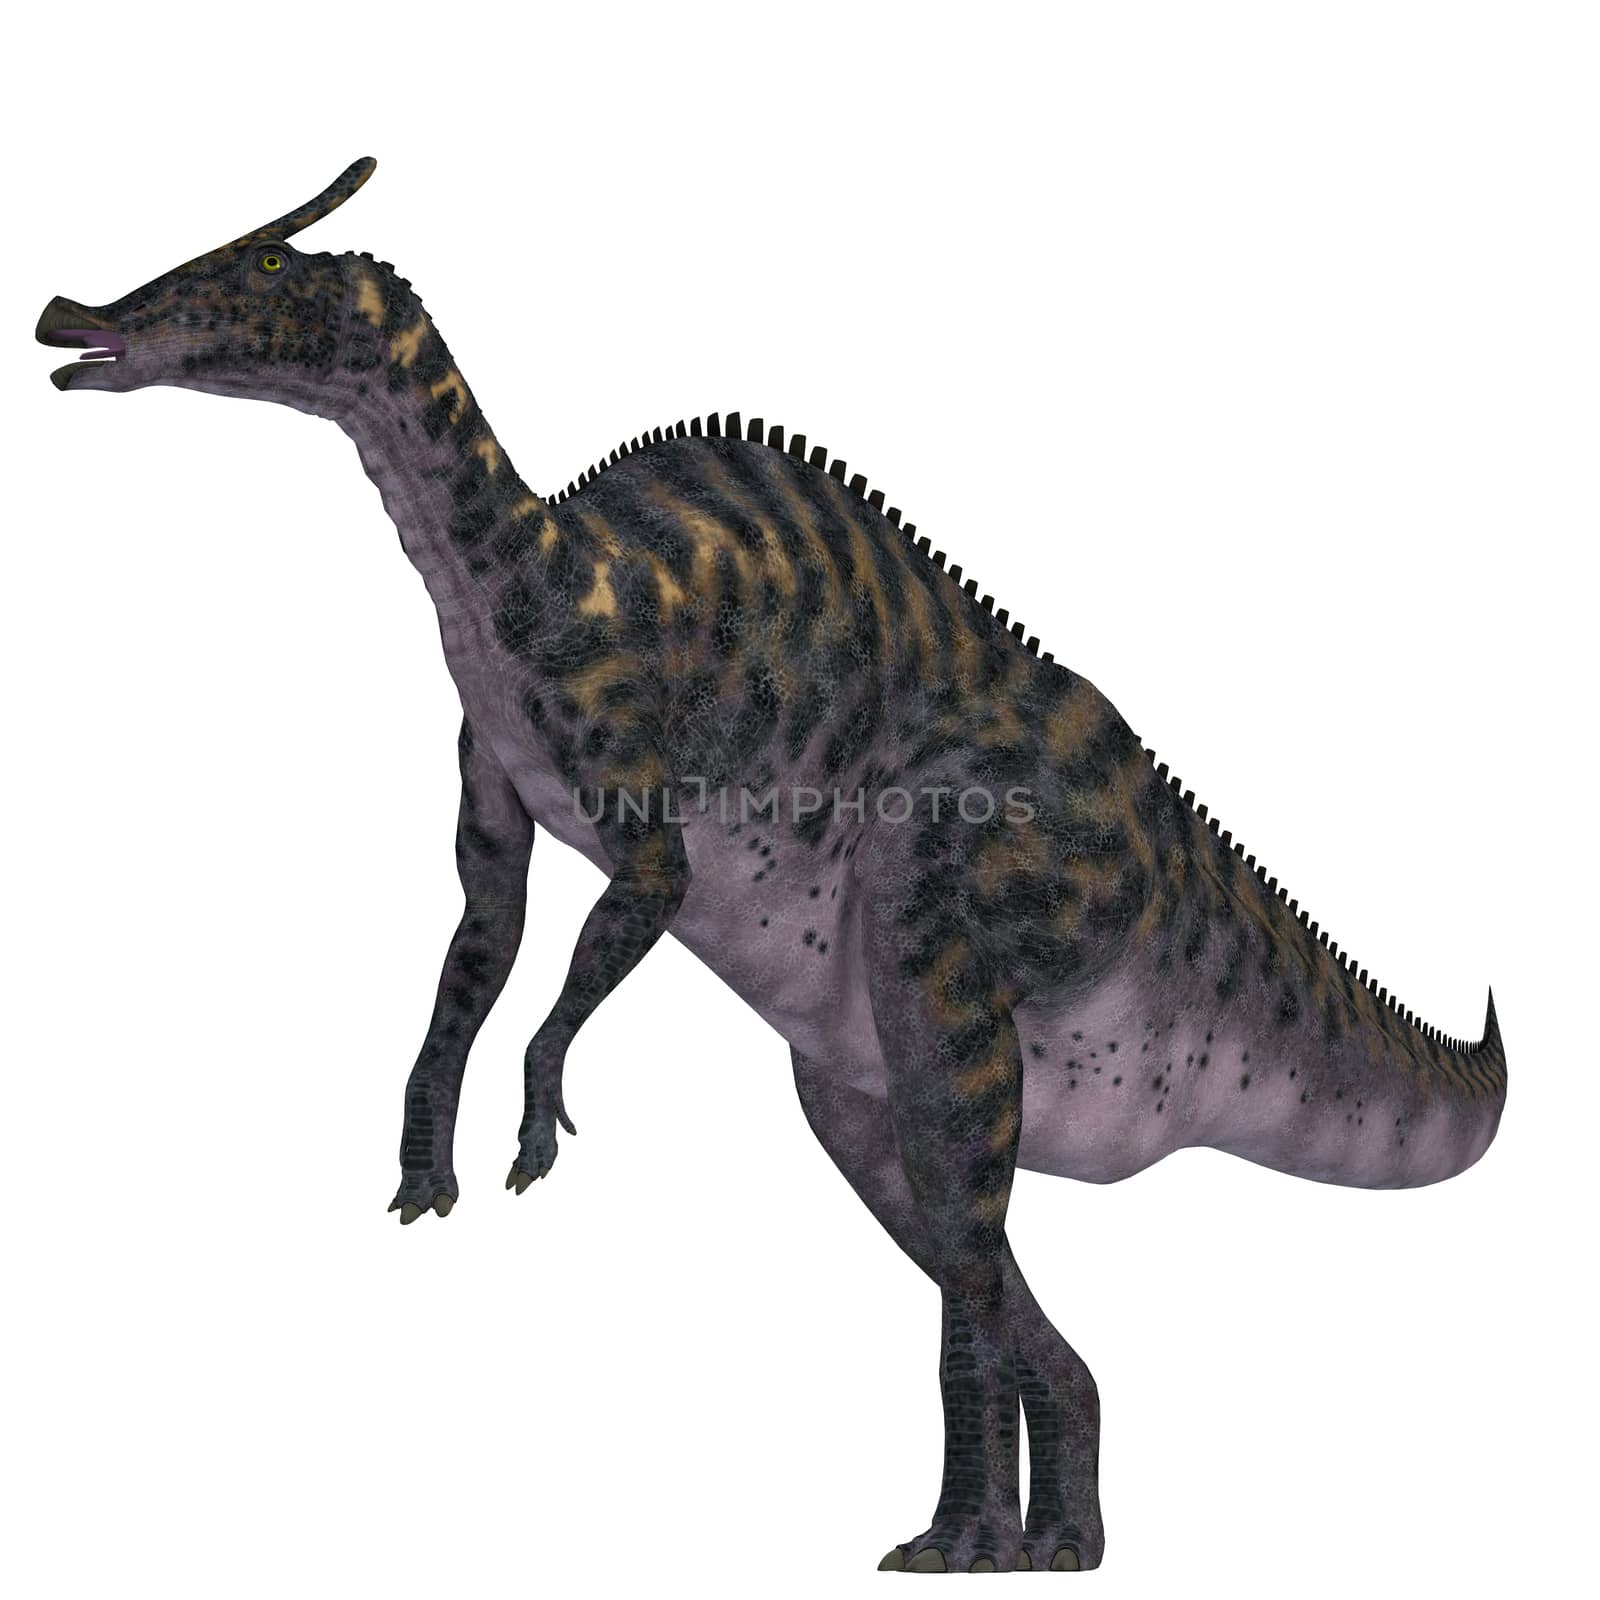 Saurolophus was a Hadrosaur herbivorous dinosaur that lived in Mongolia, Asia in the Cretaceous Period.